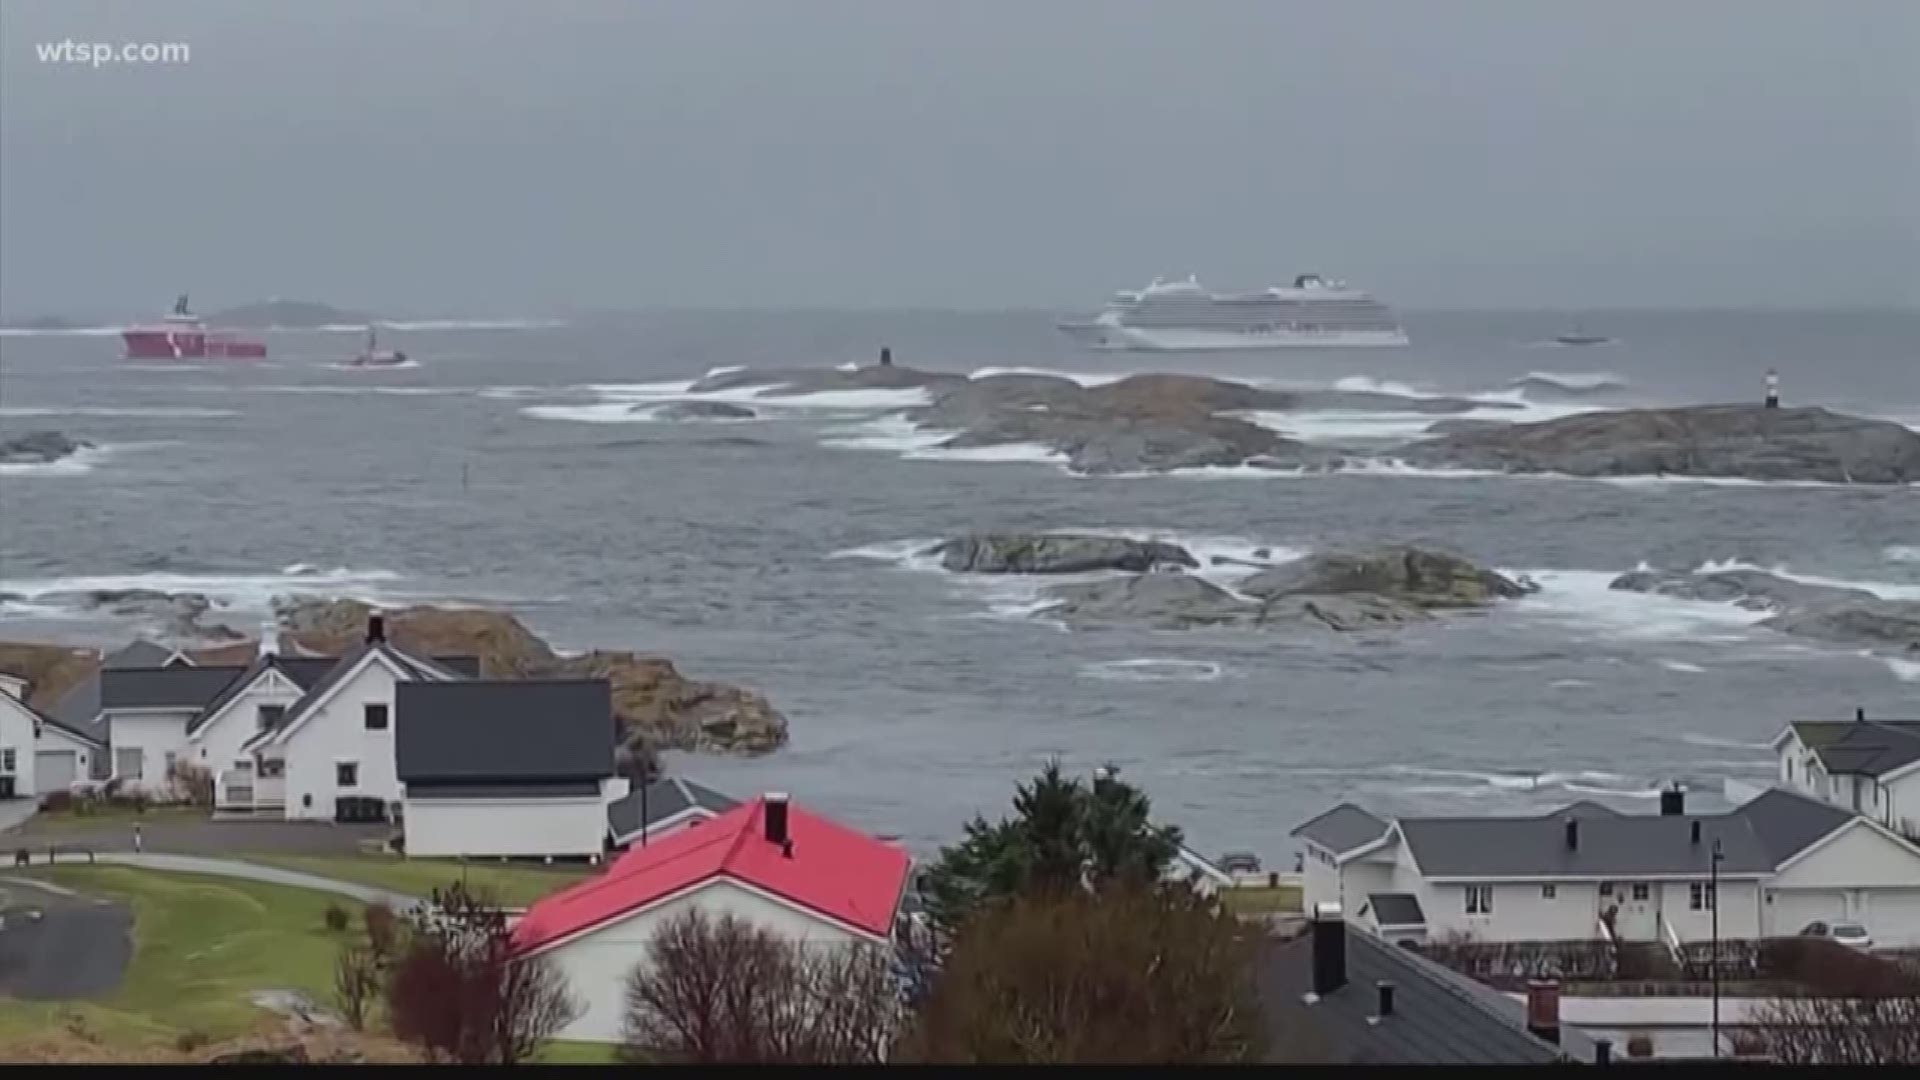 Passengers who endured evacuations from a stranded cruise ship are making arrangements to get home. More than 475 passengers were airlifted off a Viking Ocean Cruise off the coast of Norway Saturday.